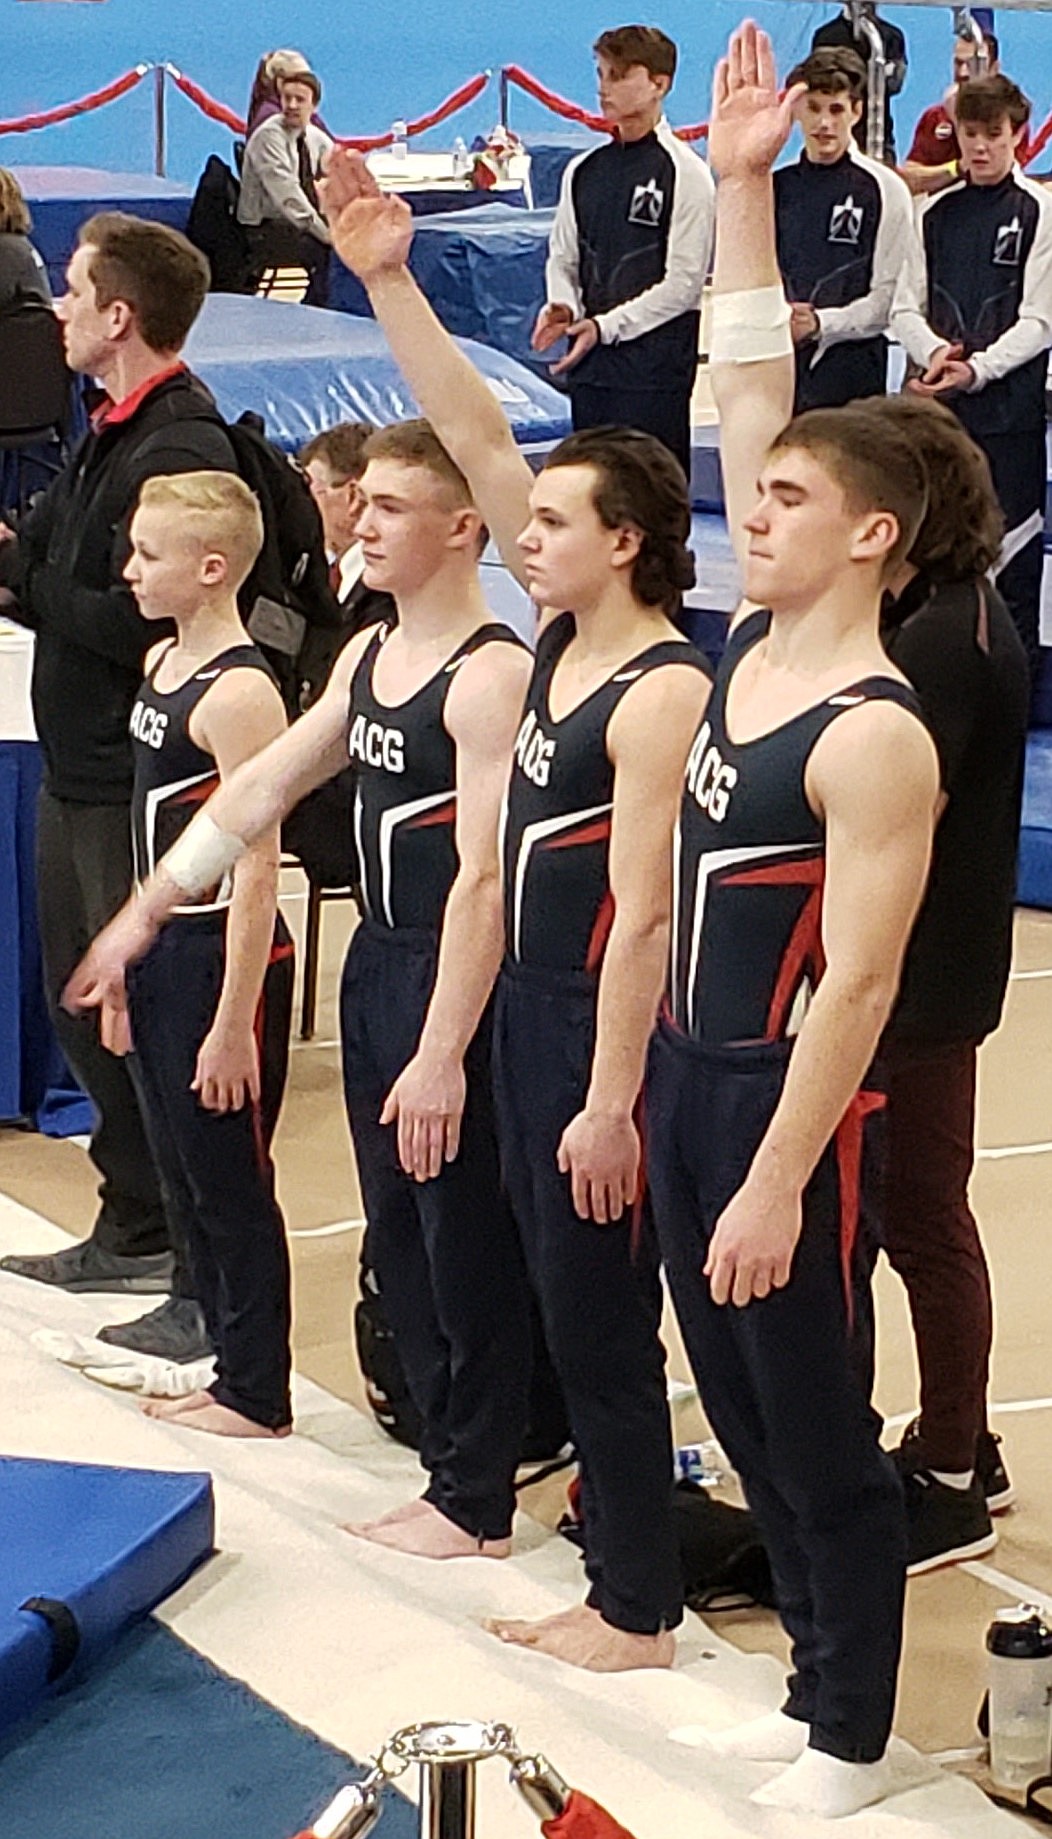 Avant Coeur Gymnastics Boys Level 8s and 10s at the Rose City Challenge in Beaverton, Ore., from left, Brandon Decker, Jesse St. Onge, Kyle Morse and Henry Pals.